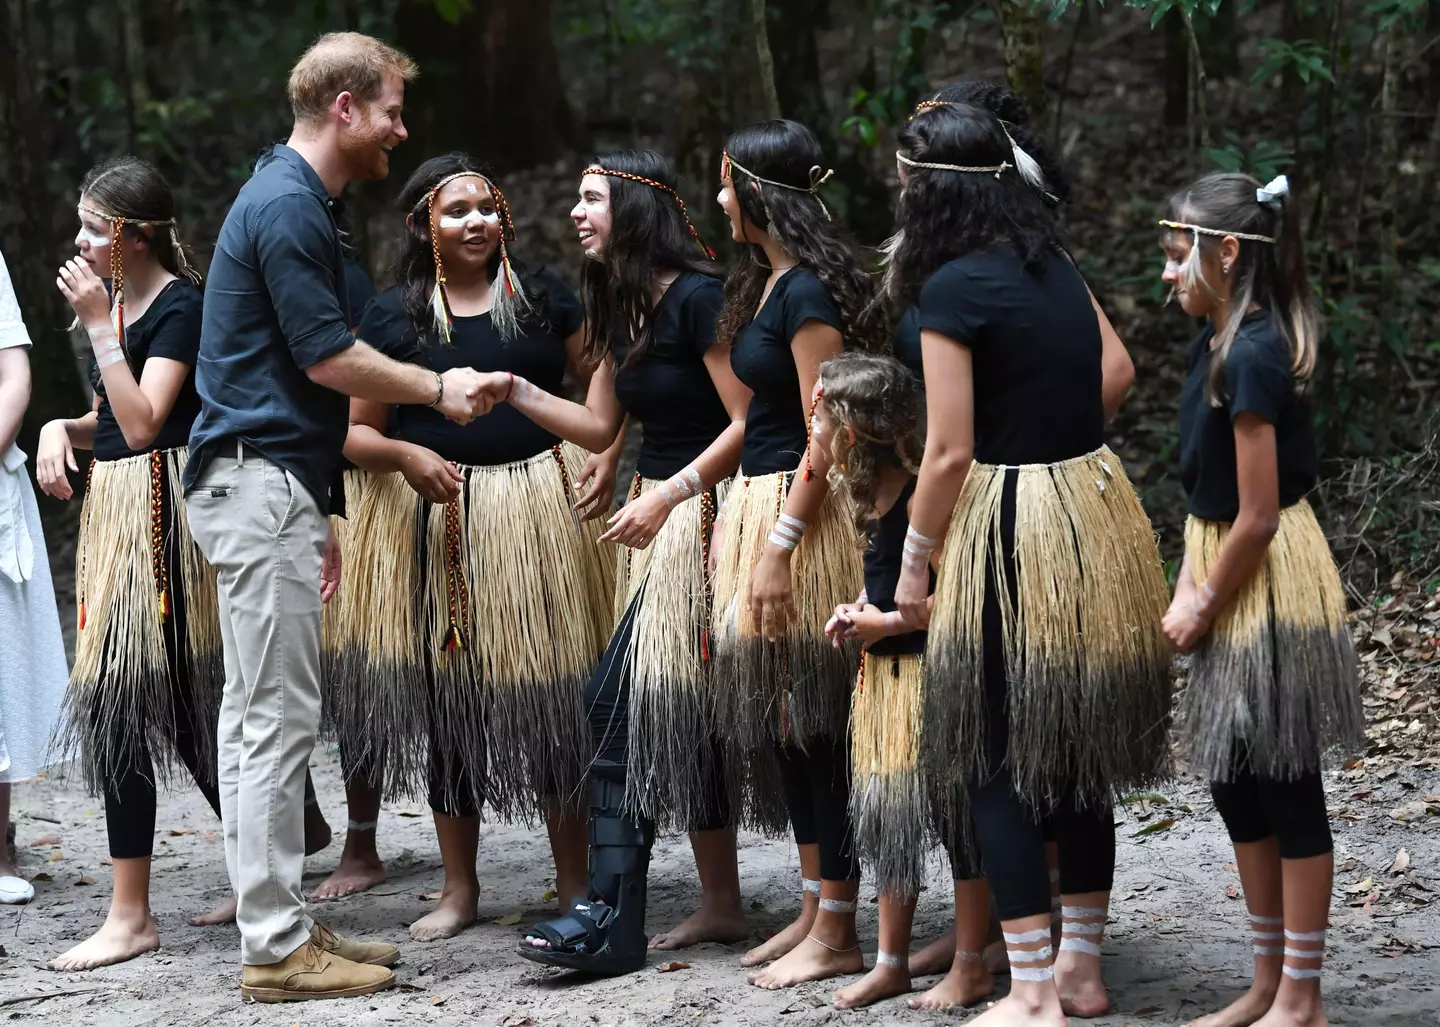 Prince Harry was in Australia when he was surprised by a comment from the crowd.